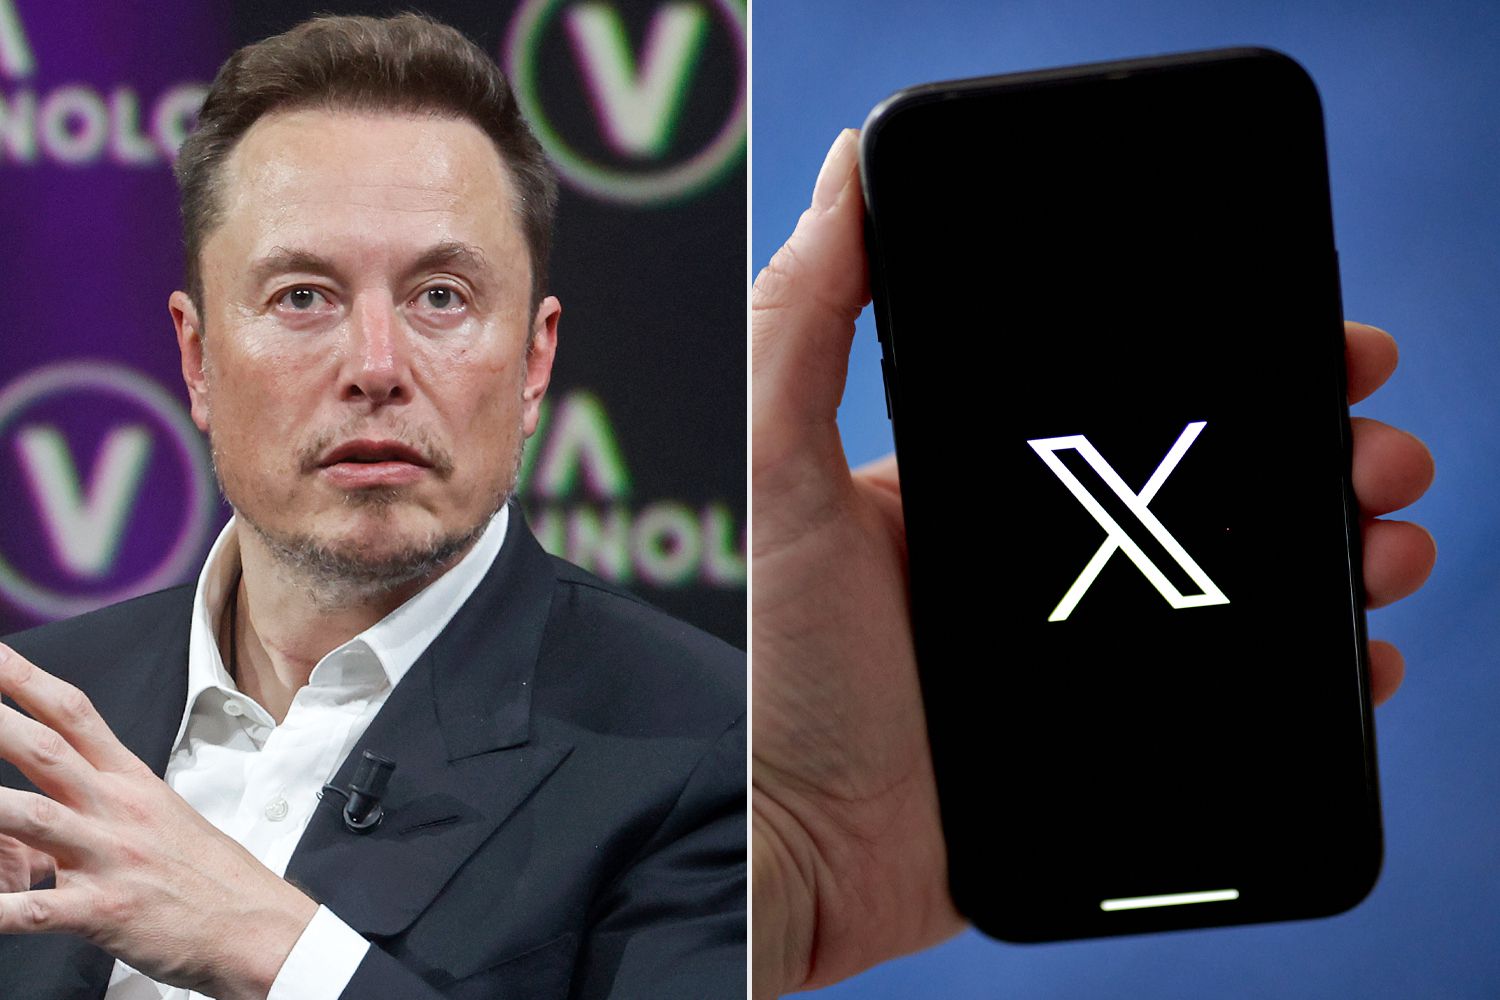 Elon Musk Suggests He Will Charge All X/Twitter Users a Fee to Be on the Platform

